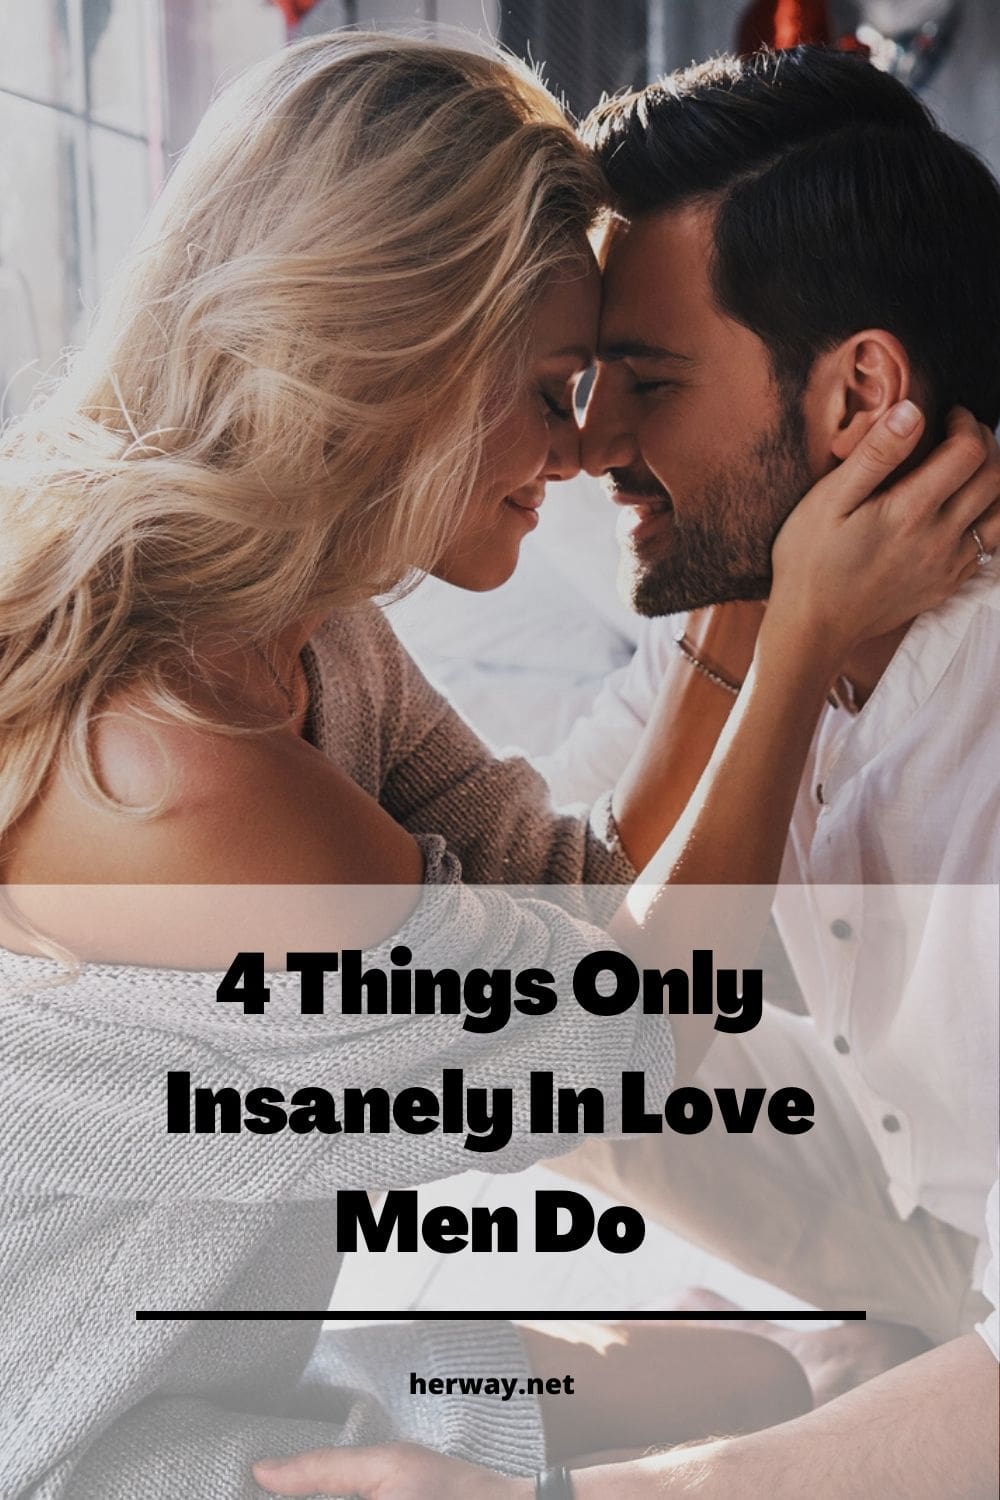 4 Things Only Insanely In Love Men Do